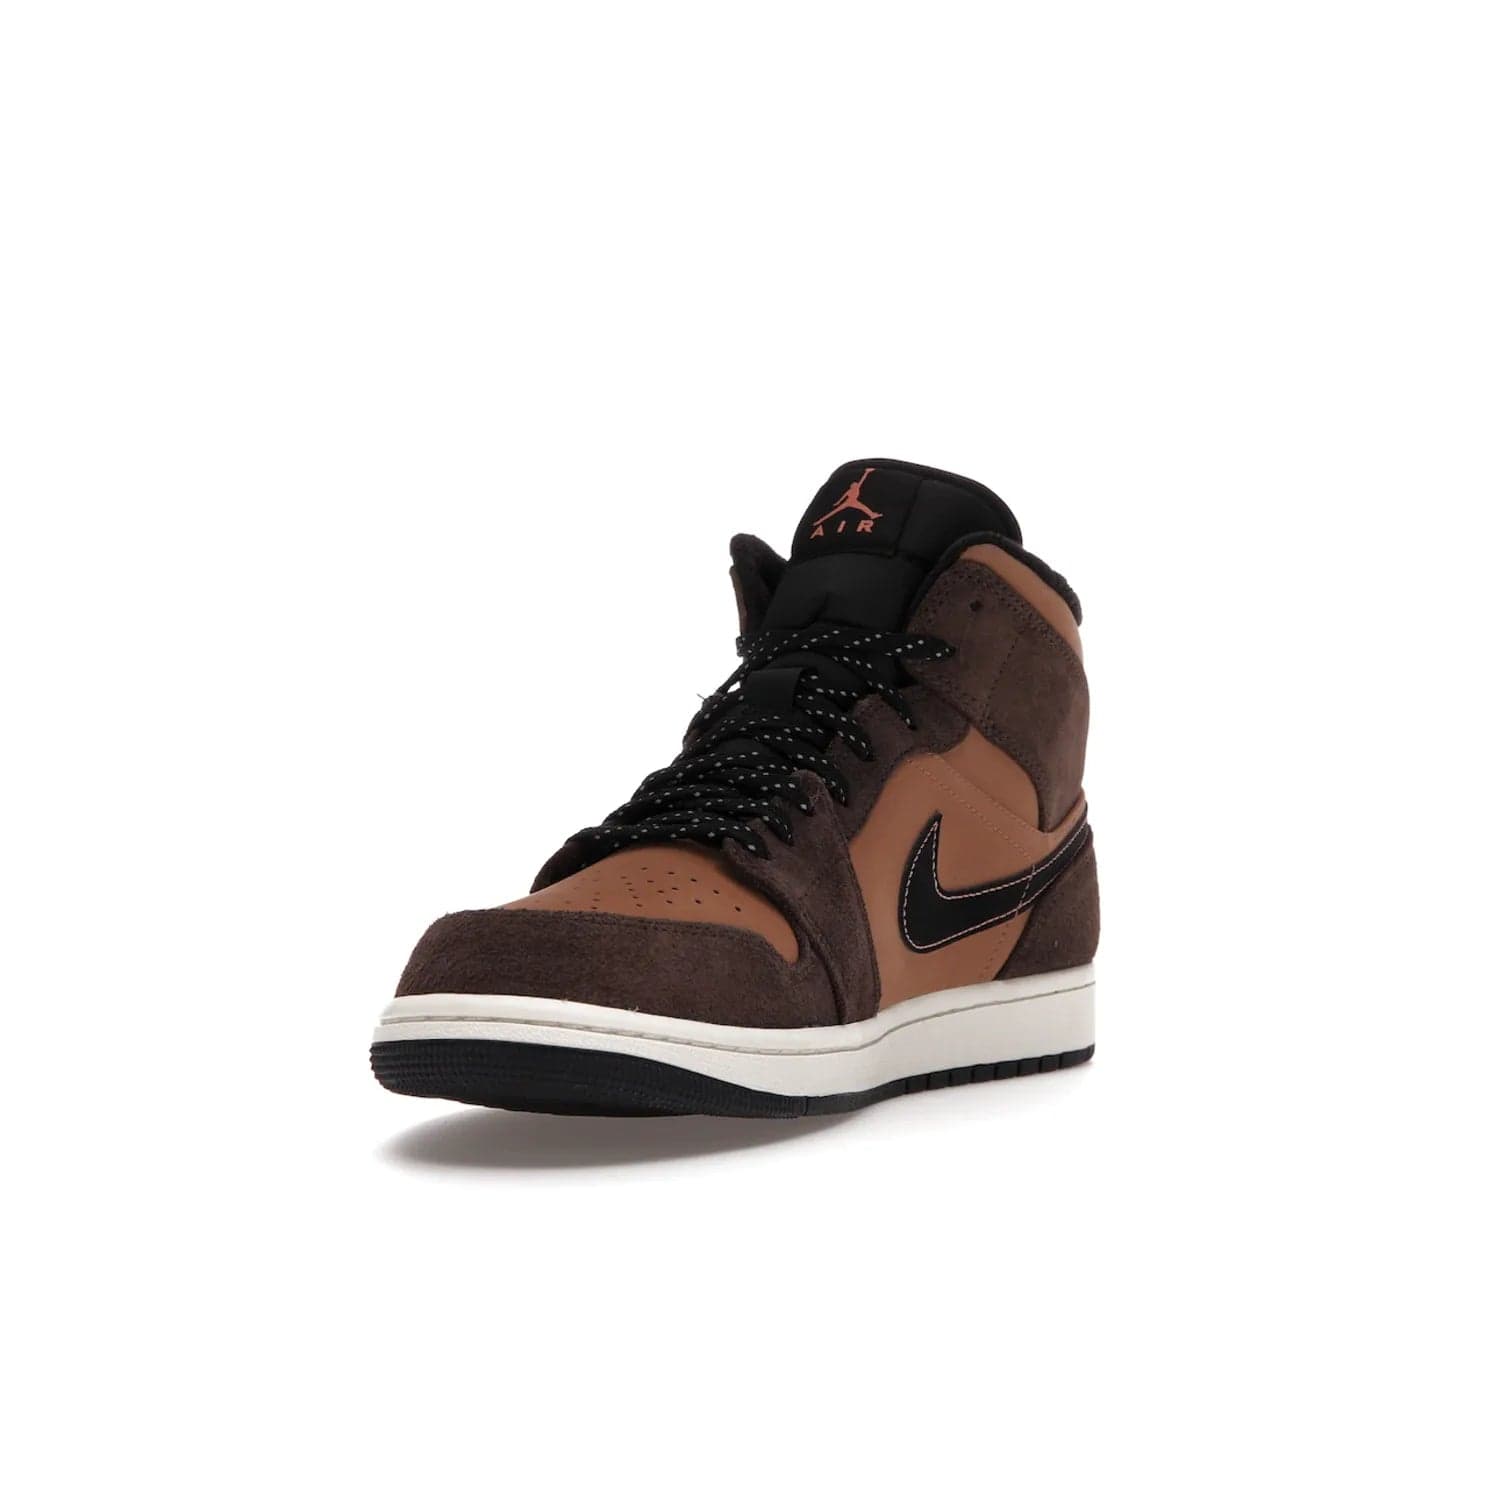 Jordan 1 Mid SE Dark Chocolate - Image 13 - Only at www.BallersClubKickz.com - This fashionable and functional Jordan 1 Mid SE Dark Chocolate features a light brown Durabuck upper, dark brown suede overlays, black Swoosh logos and reflective patch at heel. A must-have for any sneakerhead!